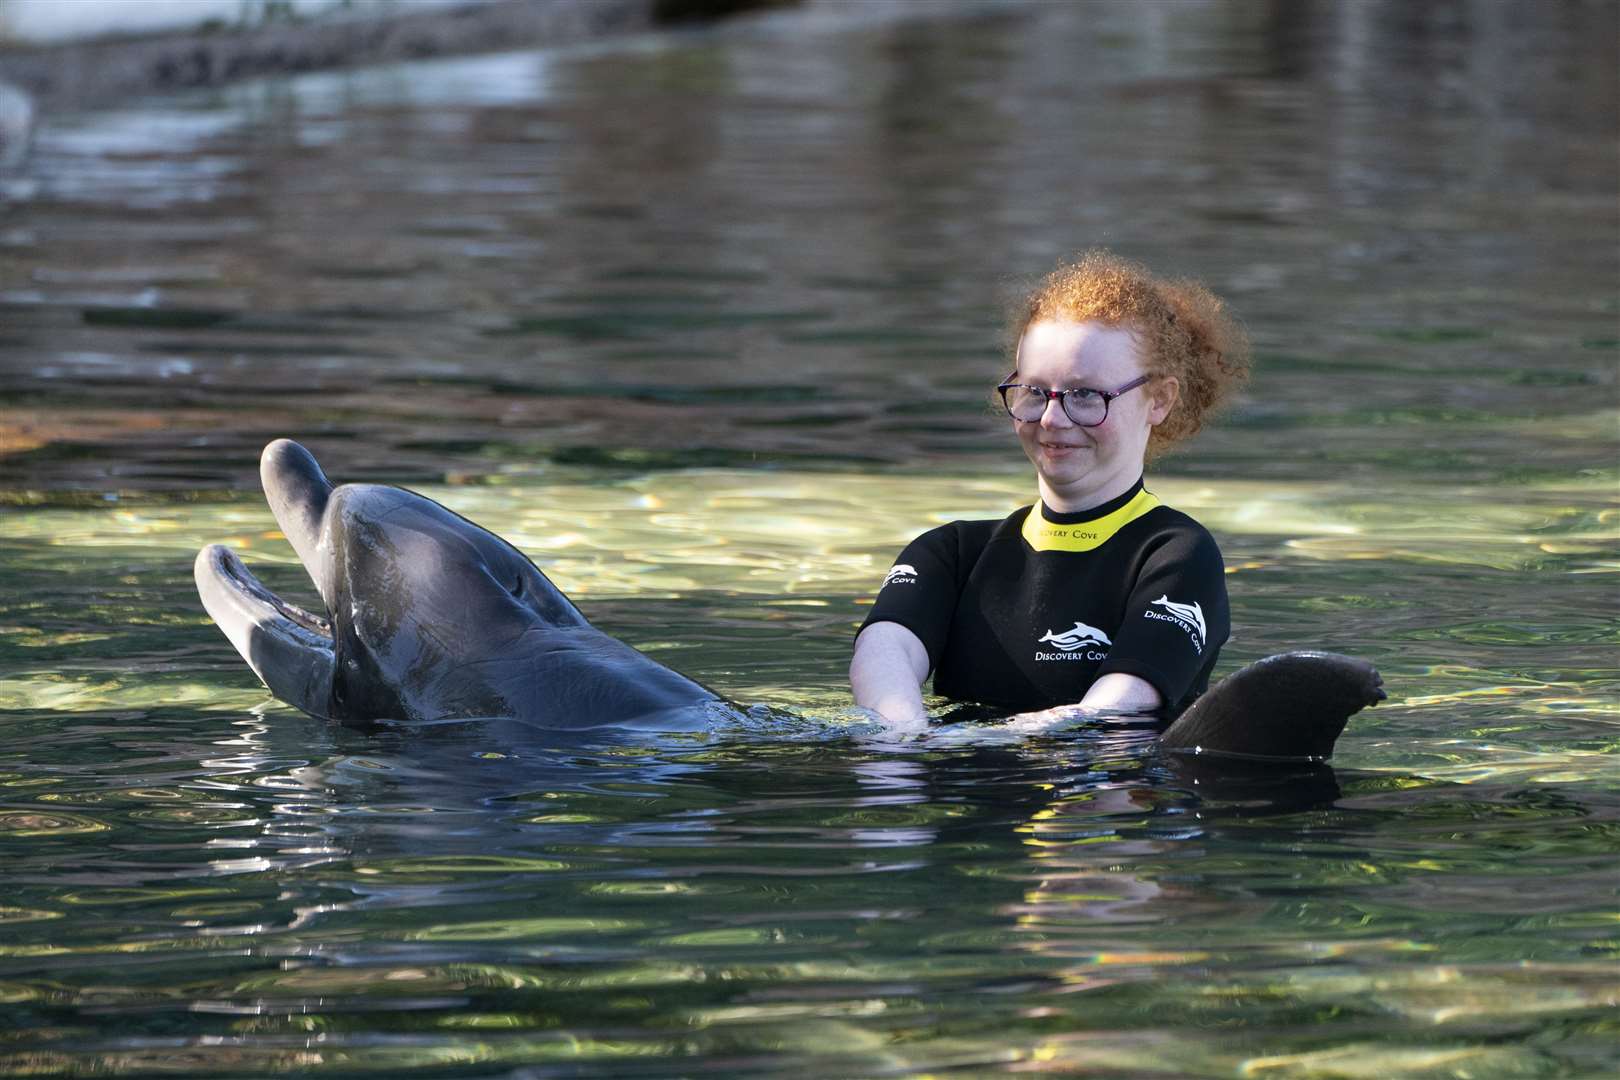 Emma Huey, 14, from Ballymoney in Co Antrim, swims with a dolphin during the Dreamflight visit to Discovery Cove in Orlando, Florida (Kirsty O’Connor/PA)